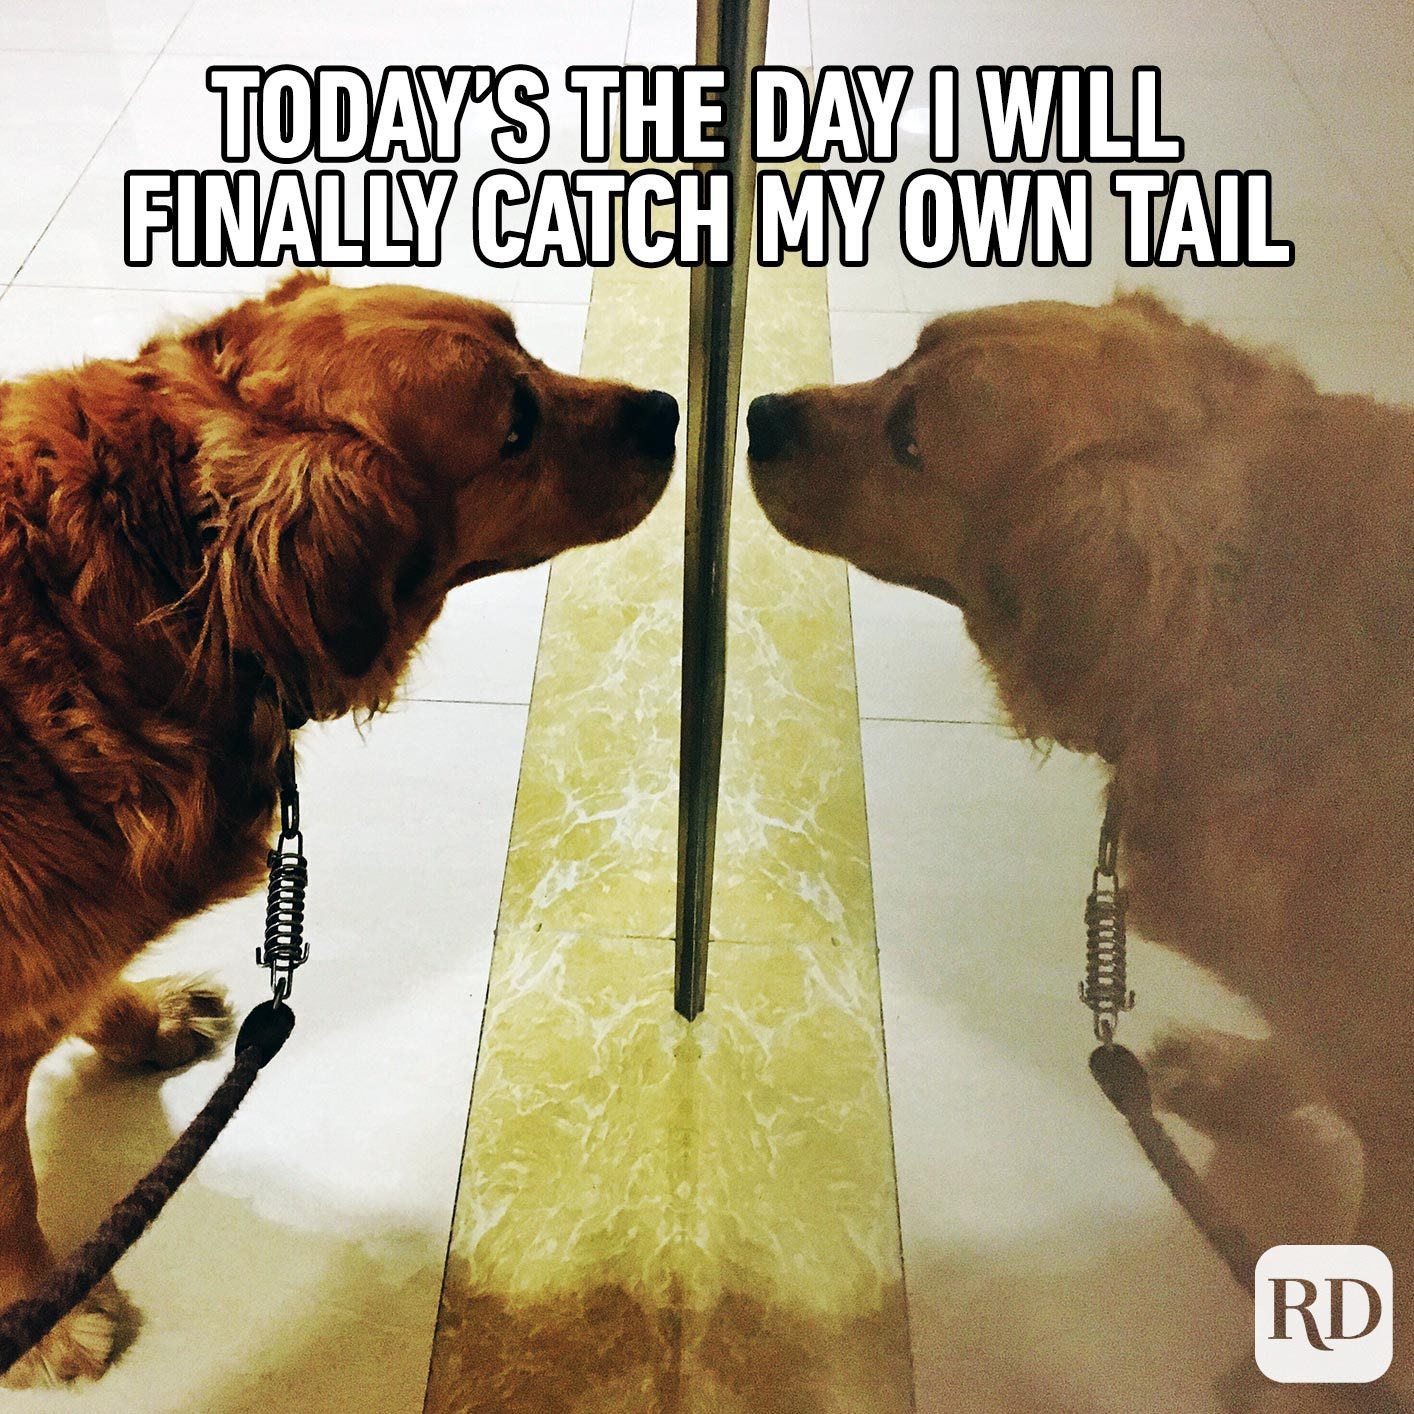 A dog staring at itself in the mirror. Meme text: Today's the day I will finally catch my own tail